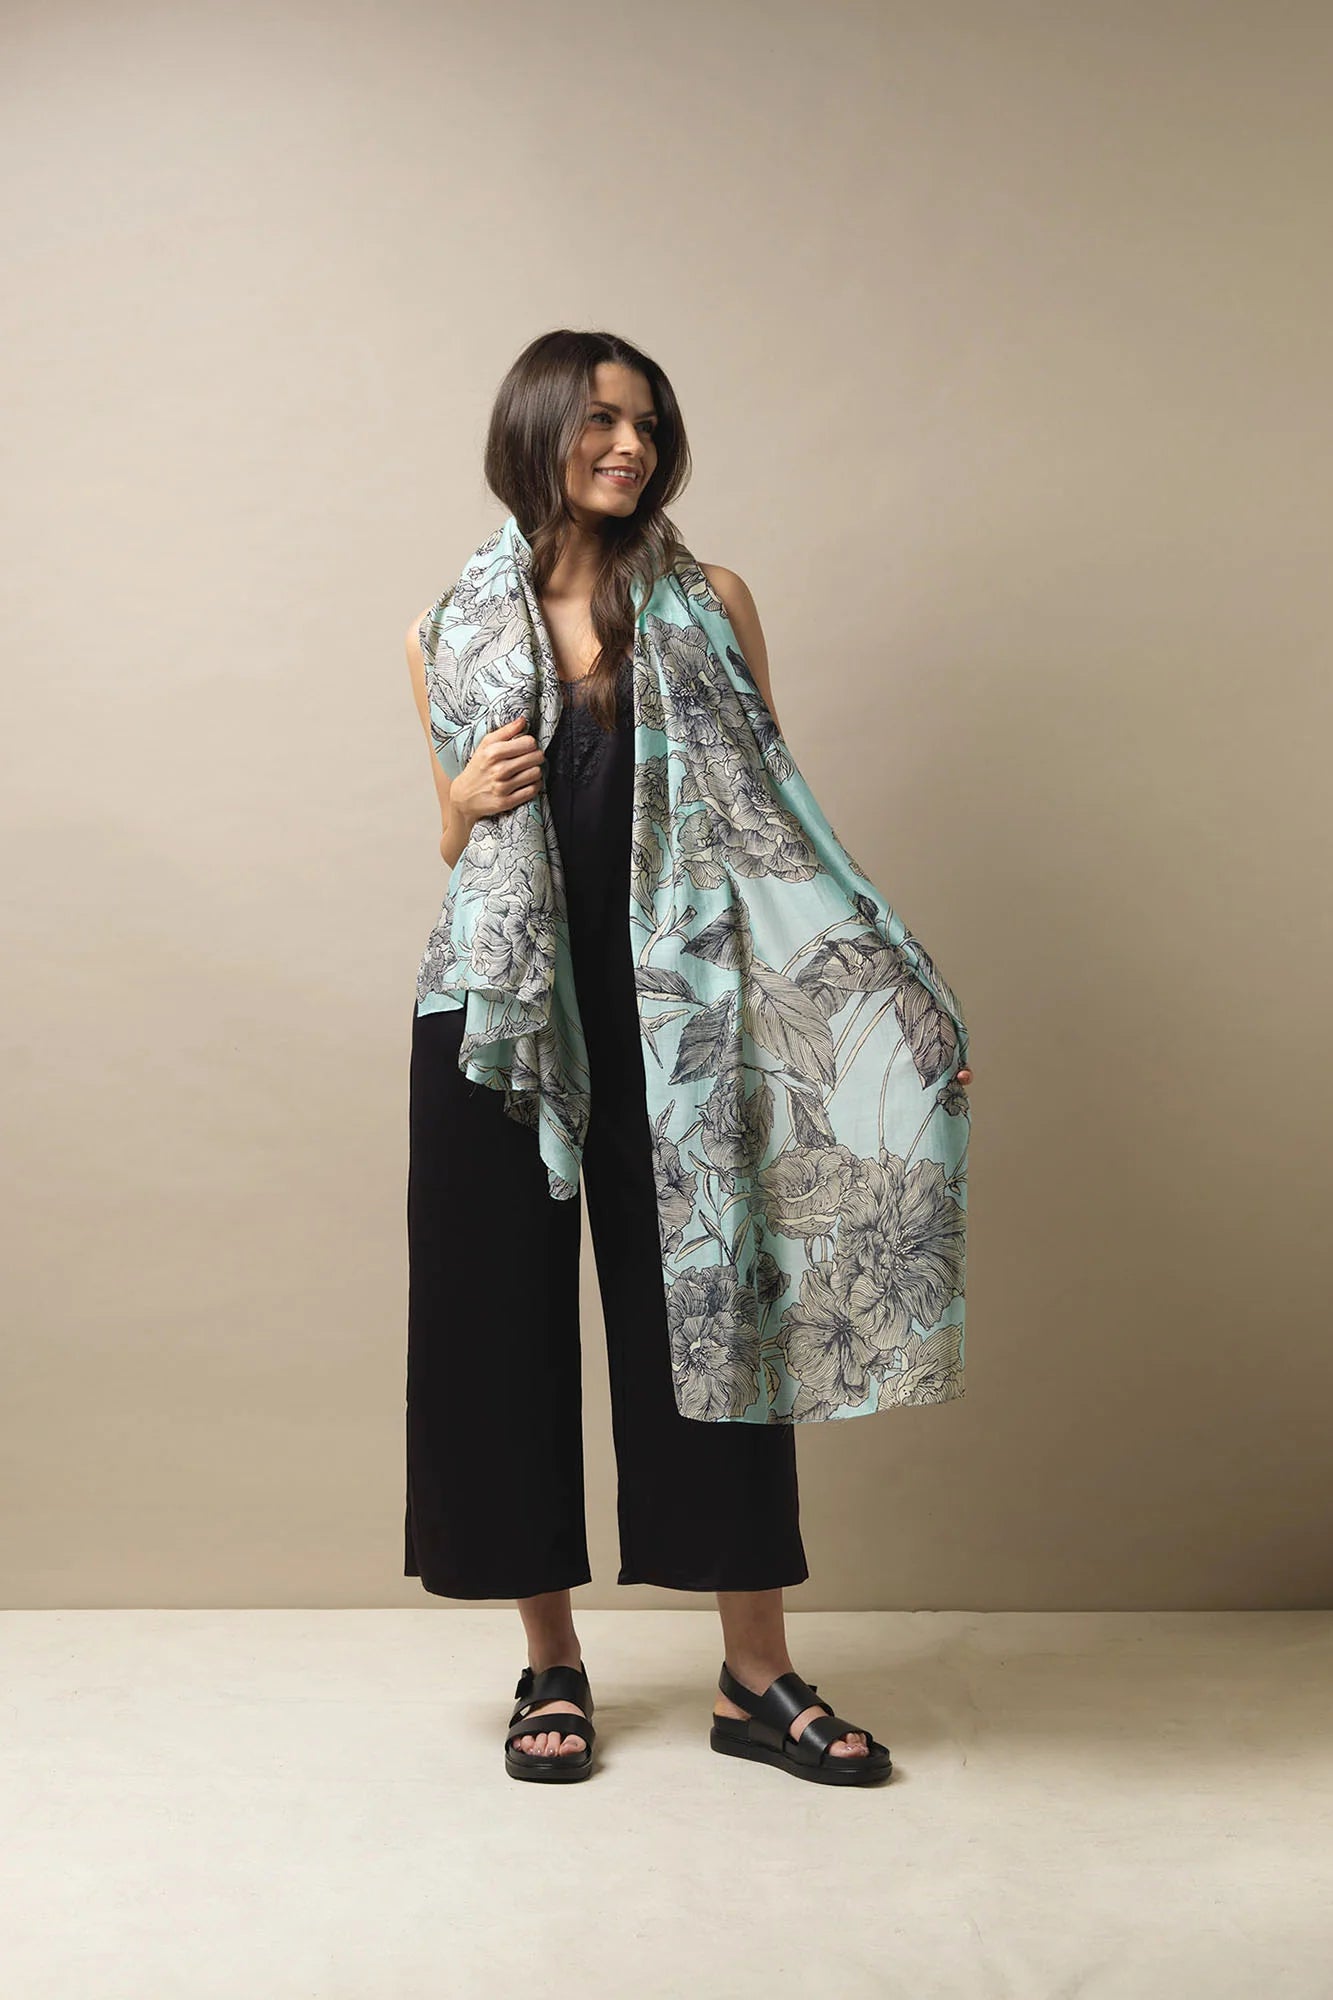 Etched Floral Aqua Scarf from One Hundred Stars